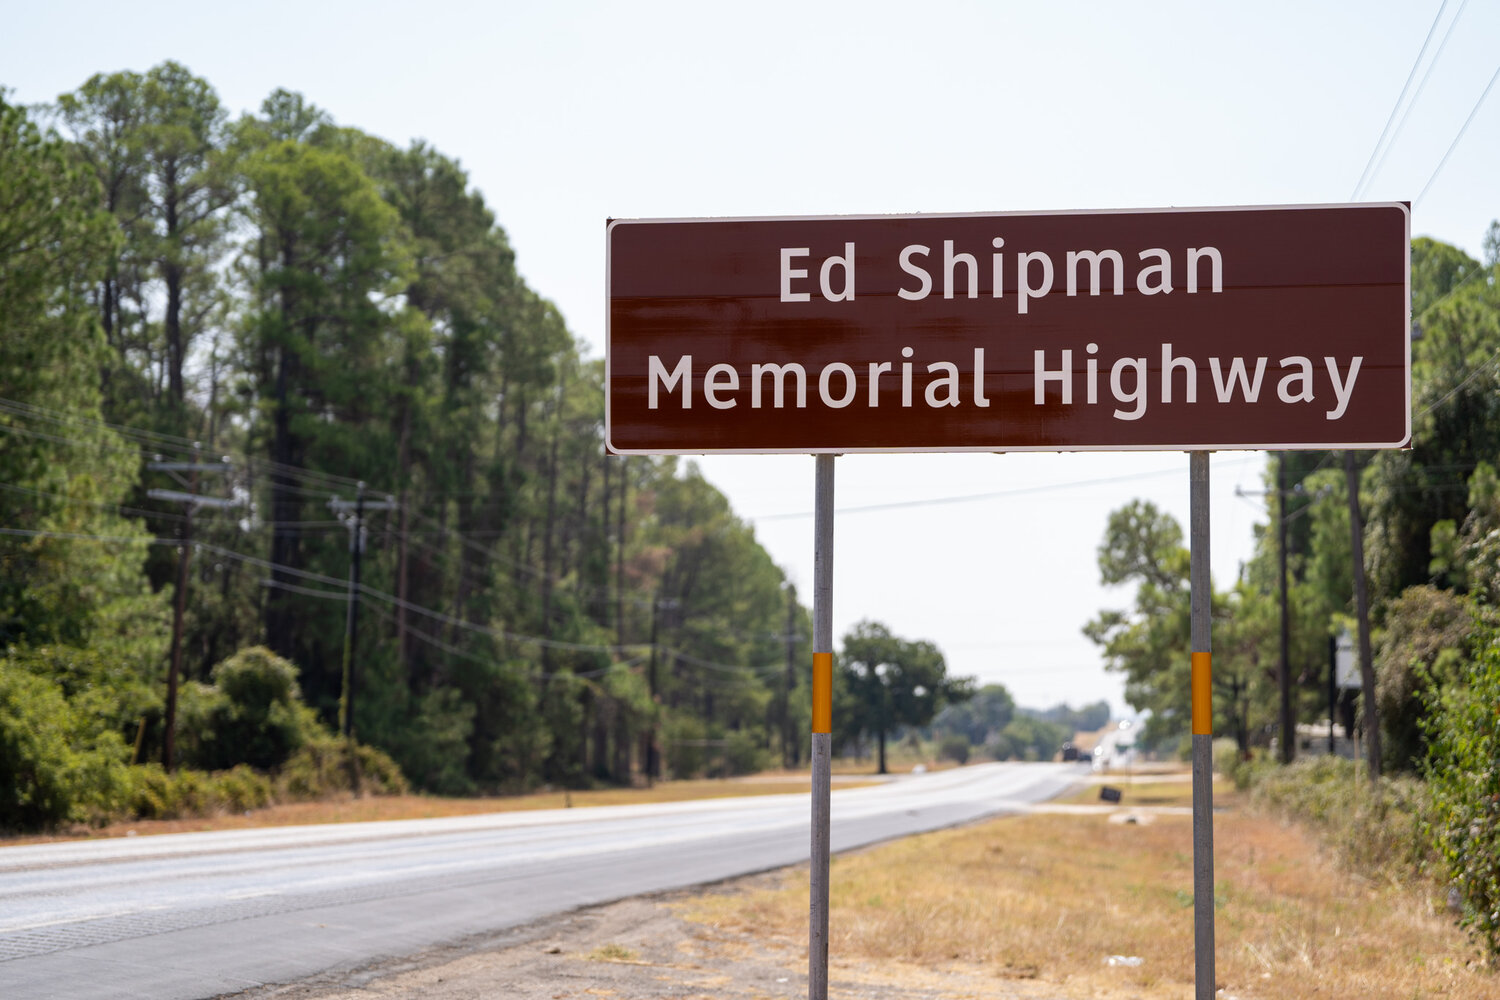 The six-mile stretch of highway in front of Happy Hill Farm on State Highway 144 was celebrated after being named in honor of Ed Shipman as part of Ed Shipman Tribute Day.